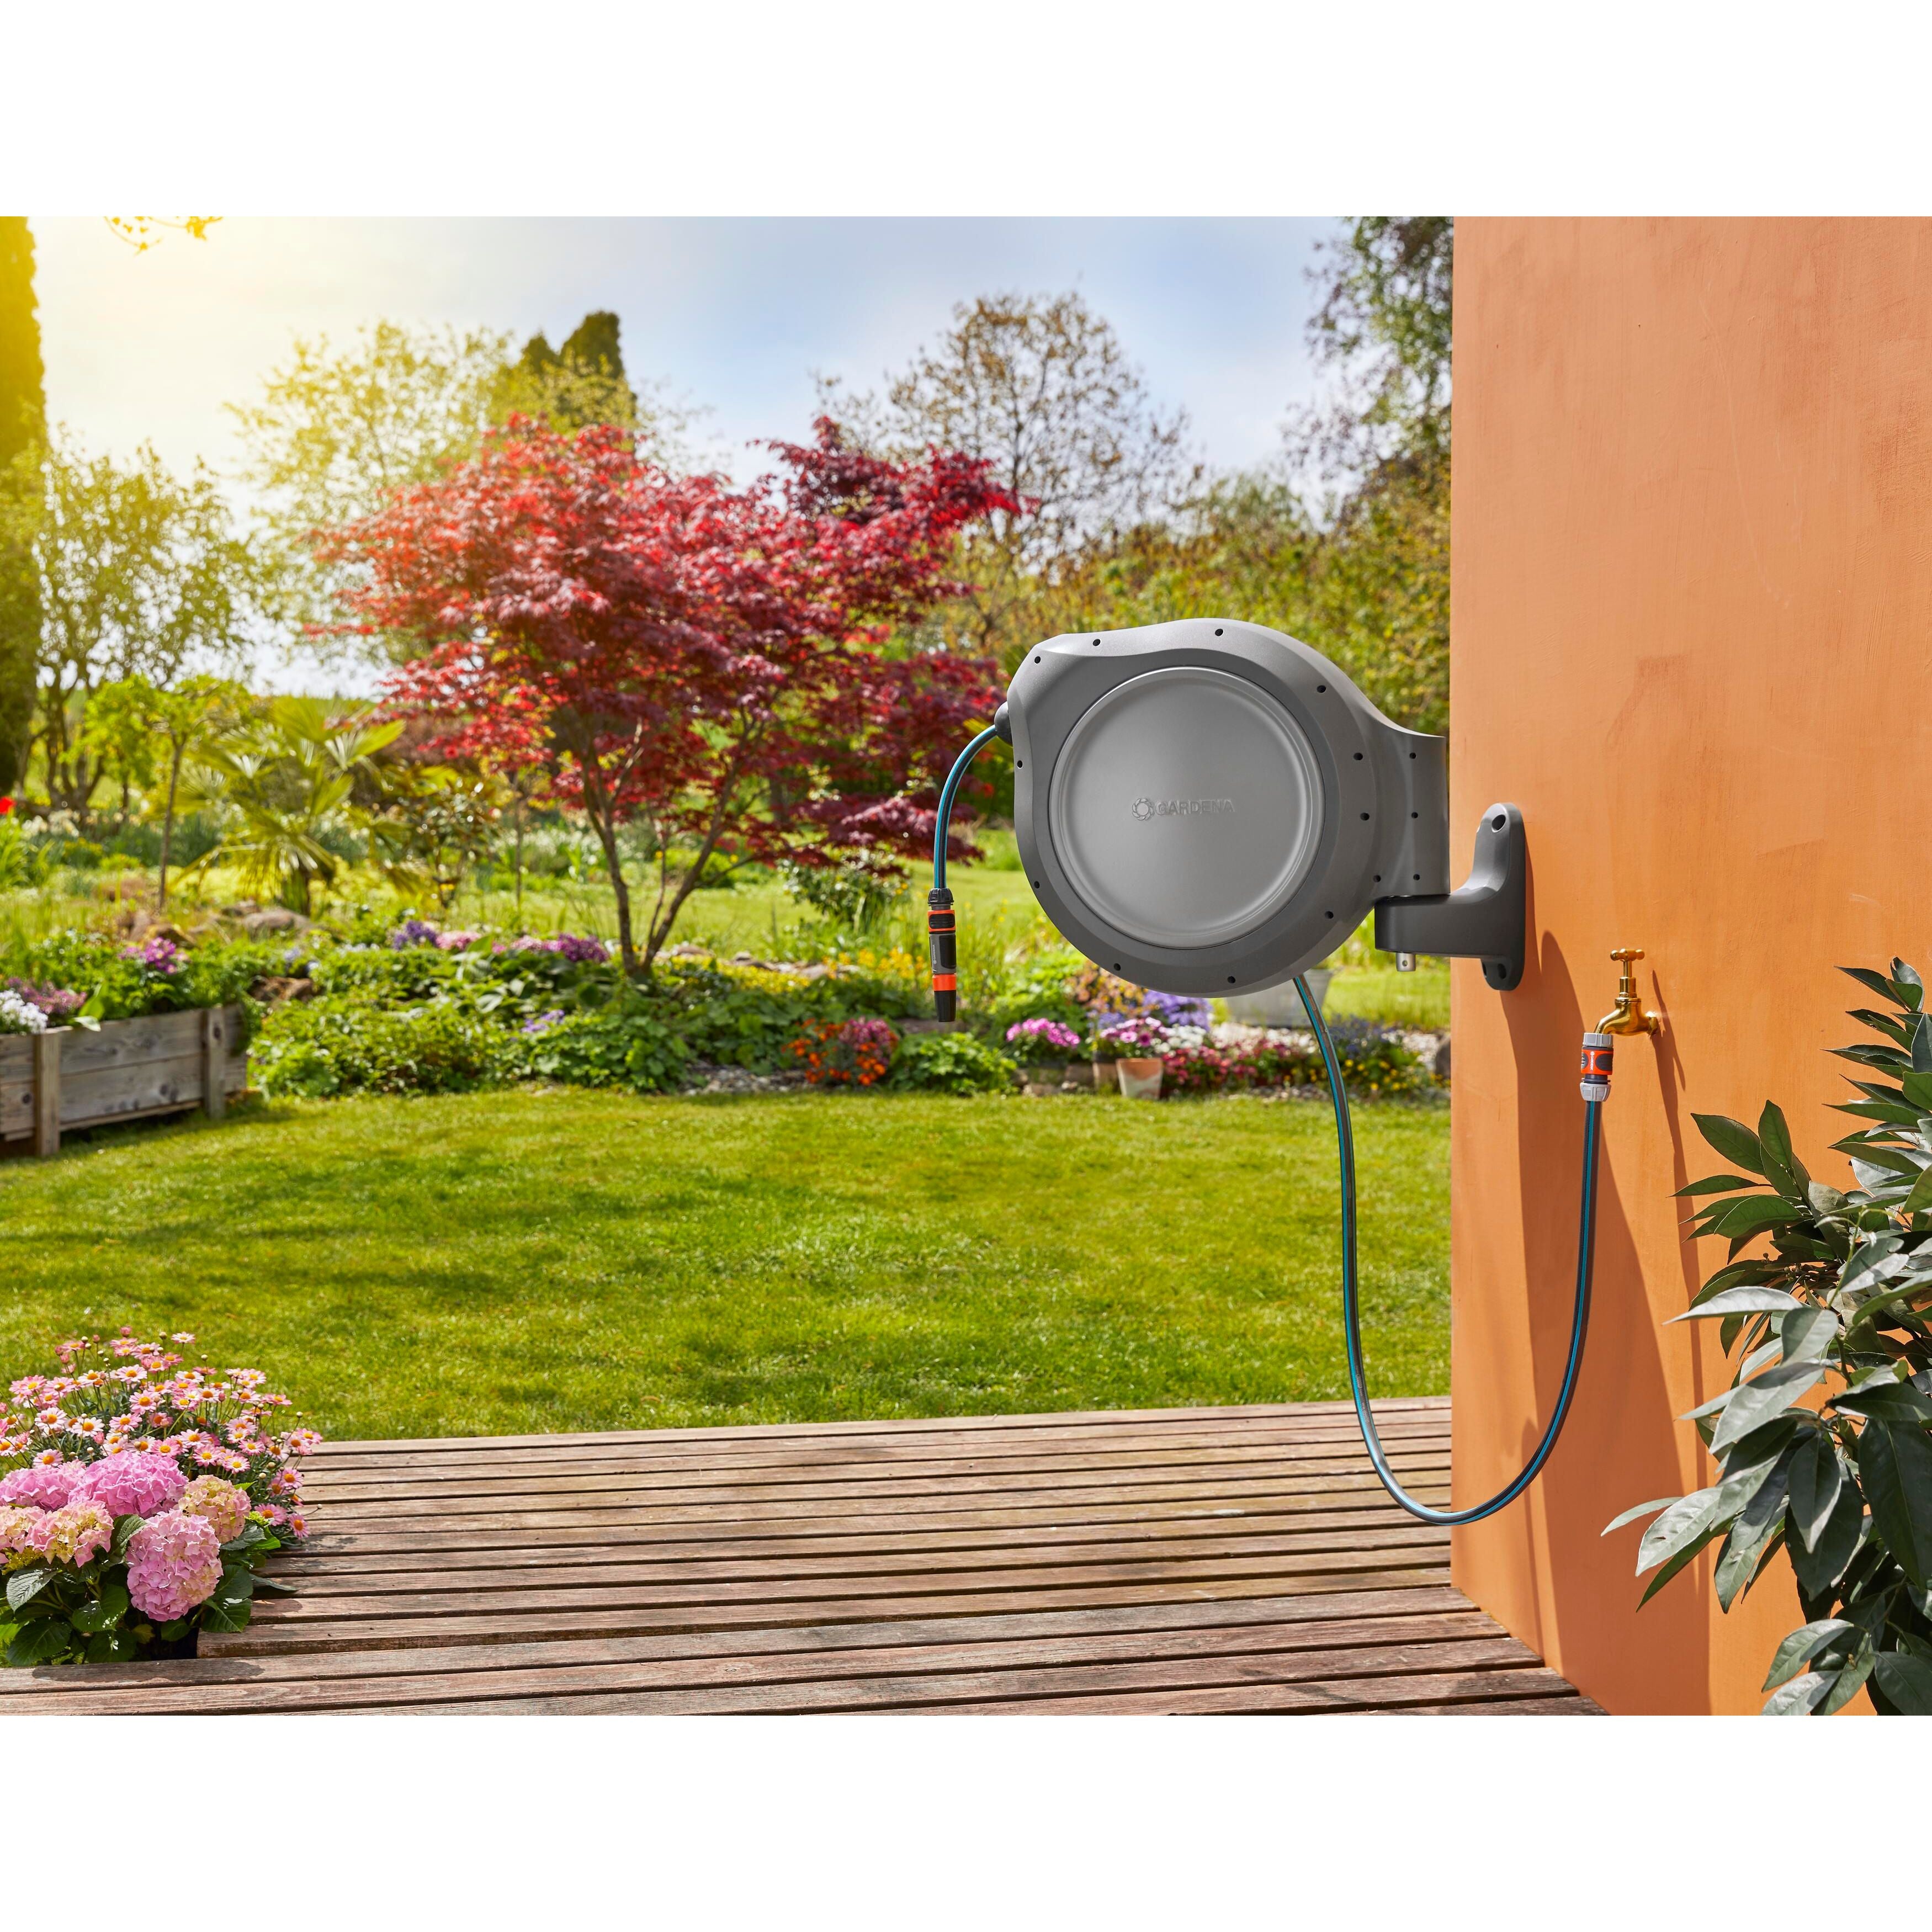 Wall-mounted automatic hose reel white Gardena RollUp ML 18622-20.000.00  home houce garden appliences watering and irrigation reels - AliExpress